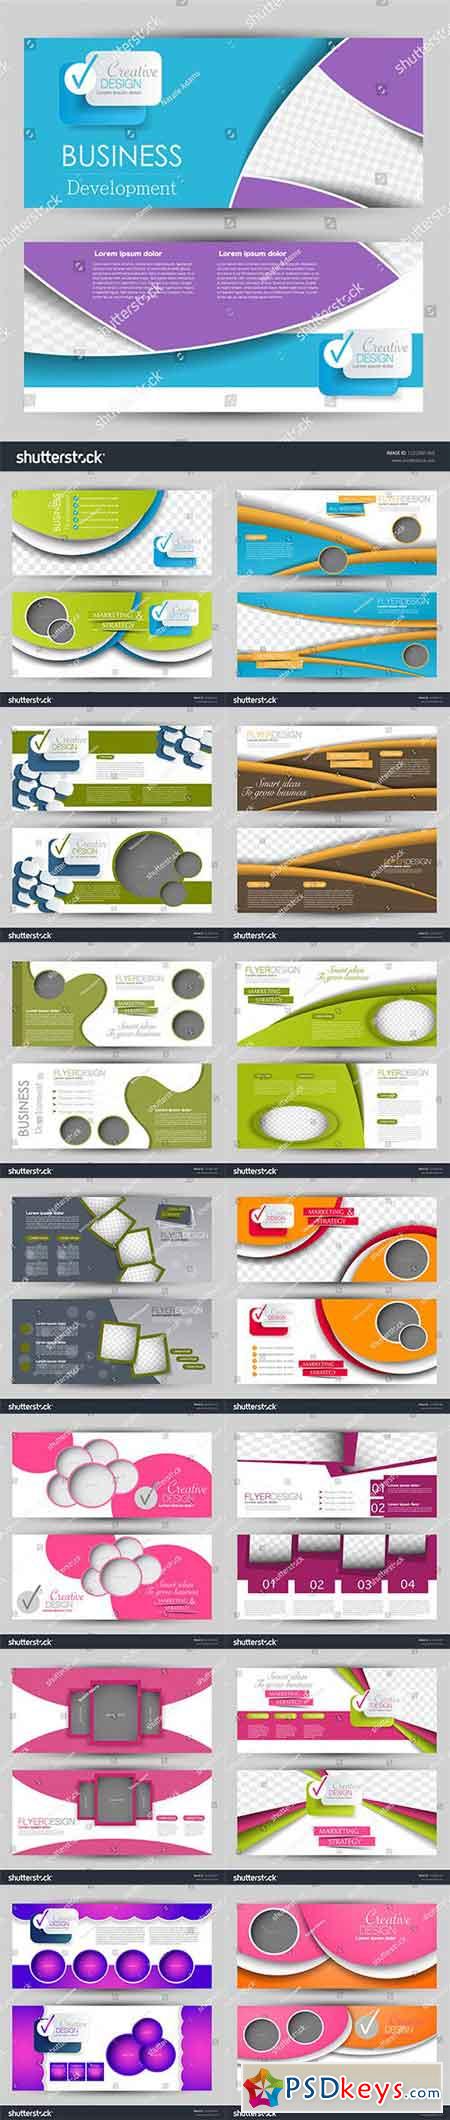 Flyers banners or web headers templates